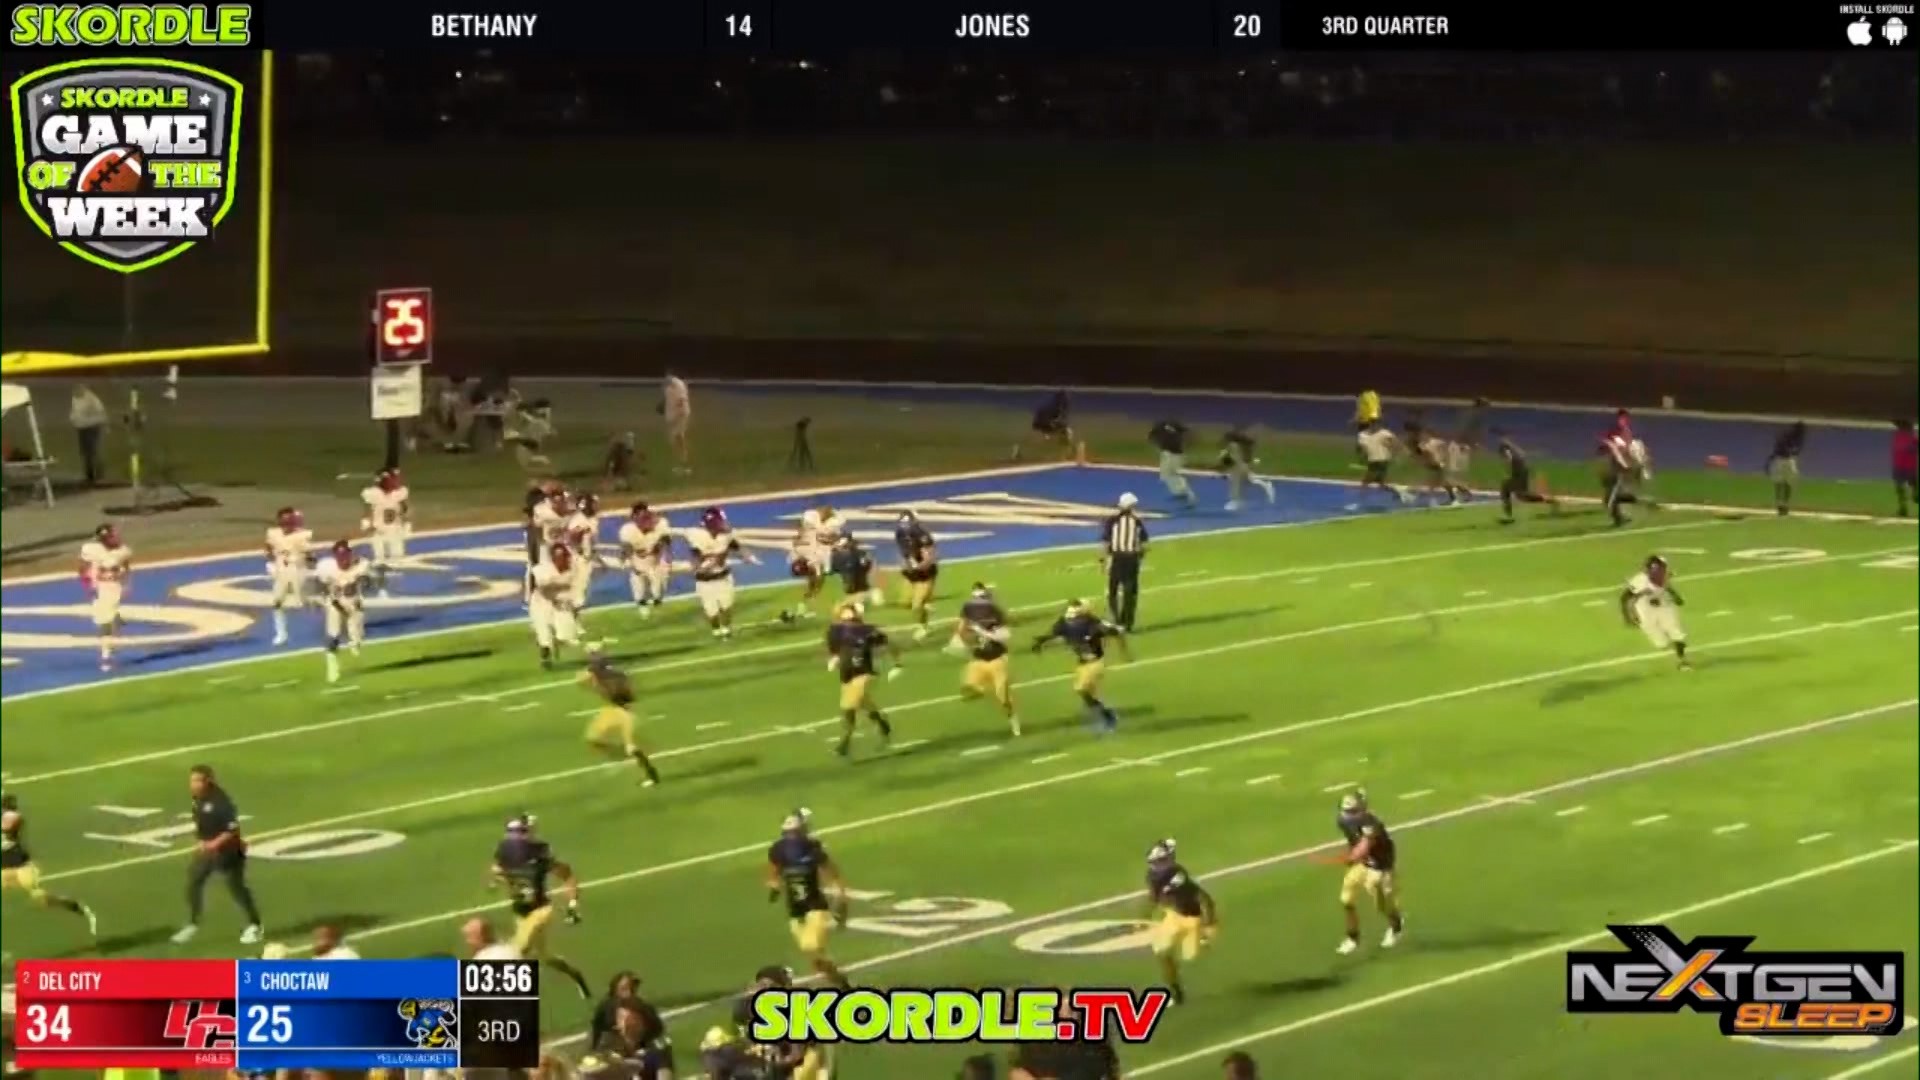 Four people were shot during a high school football game Friday night in Oklahoma where a police officer also fired a weapon, authorities said. Courtesy: Skordle TV